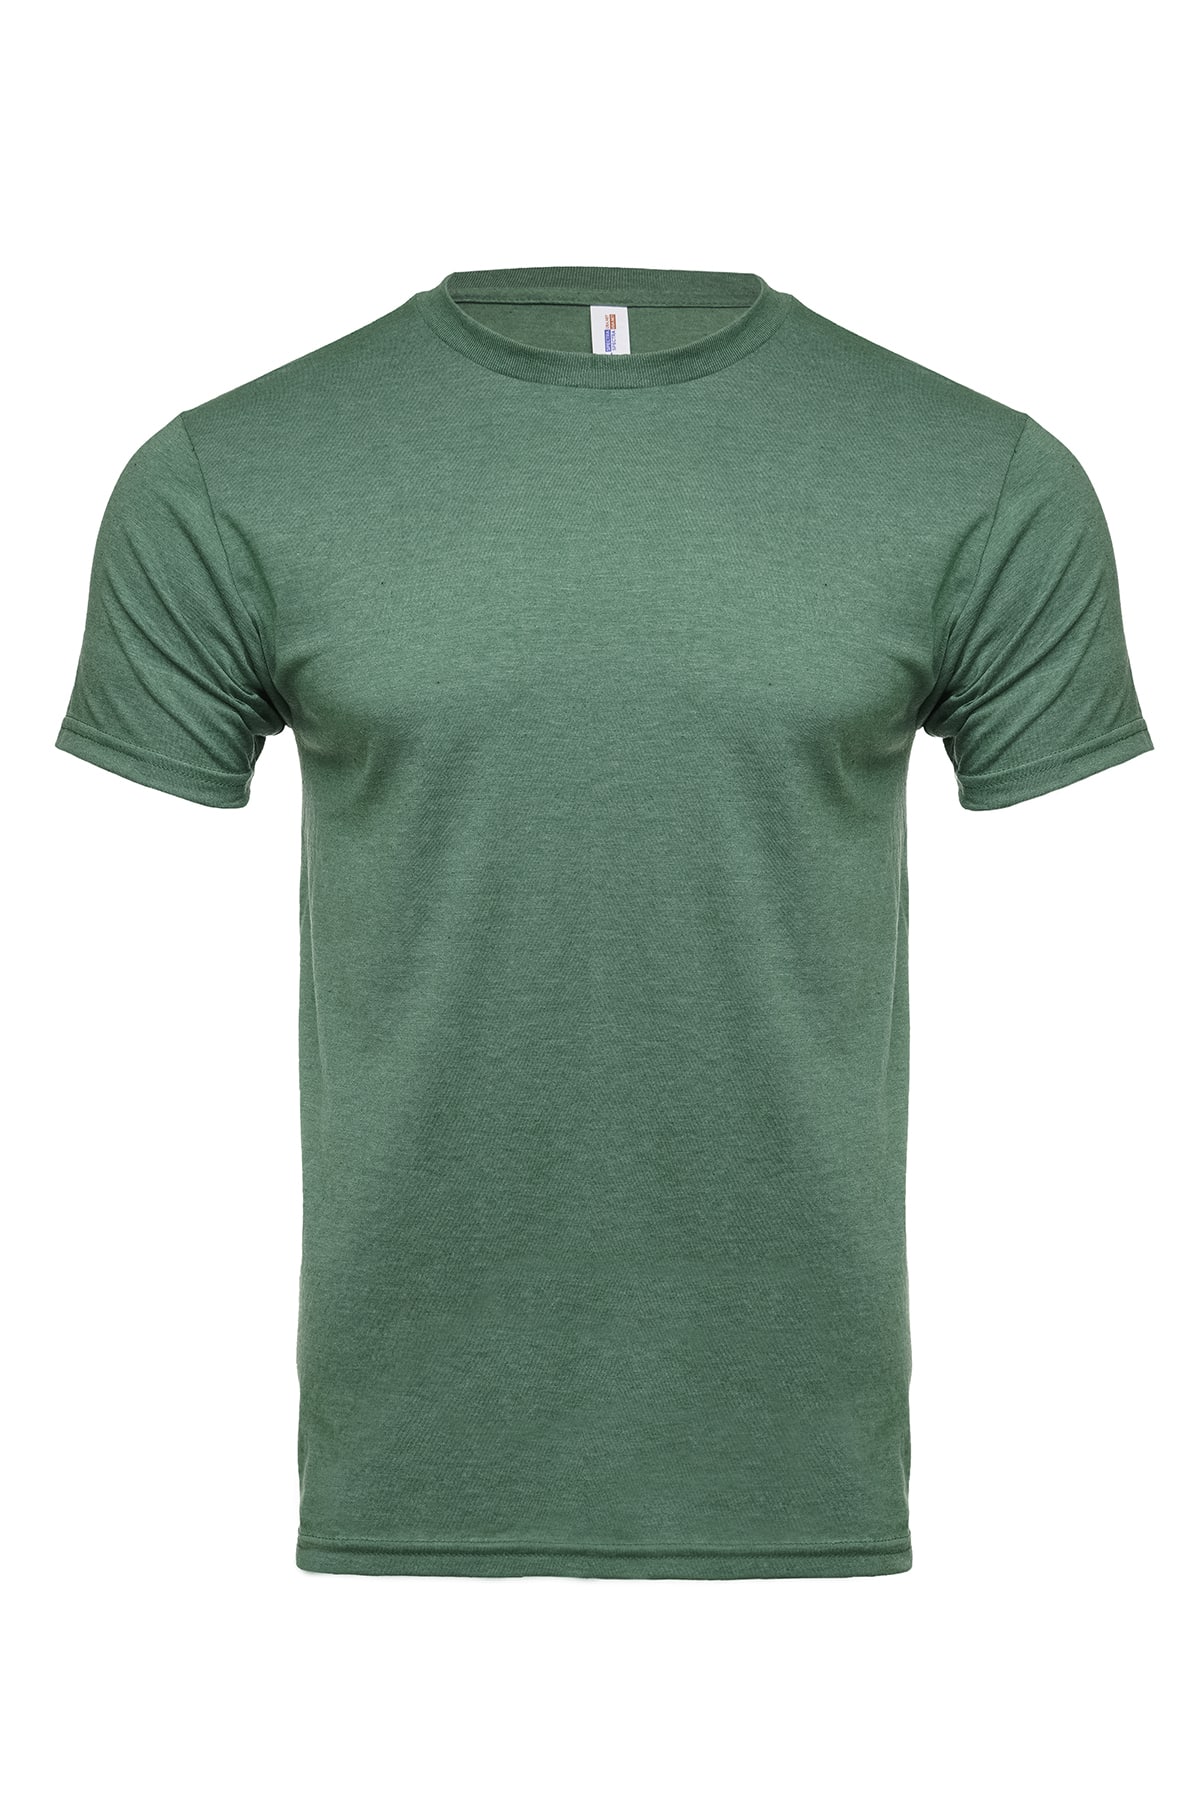 3050 Kelly Green Heather Front T-shirt